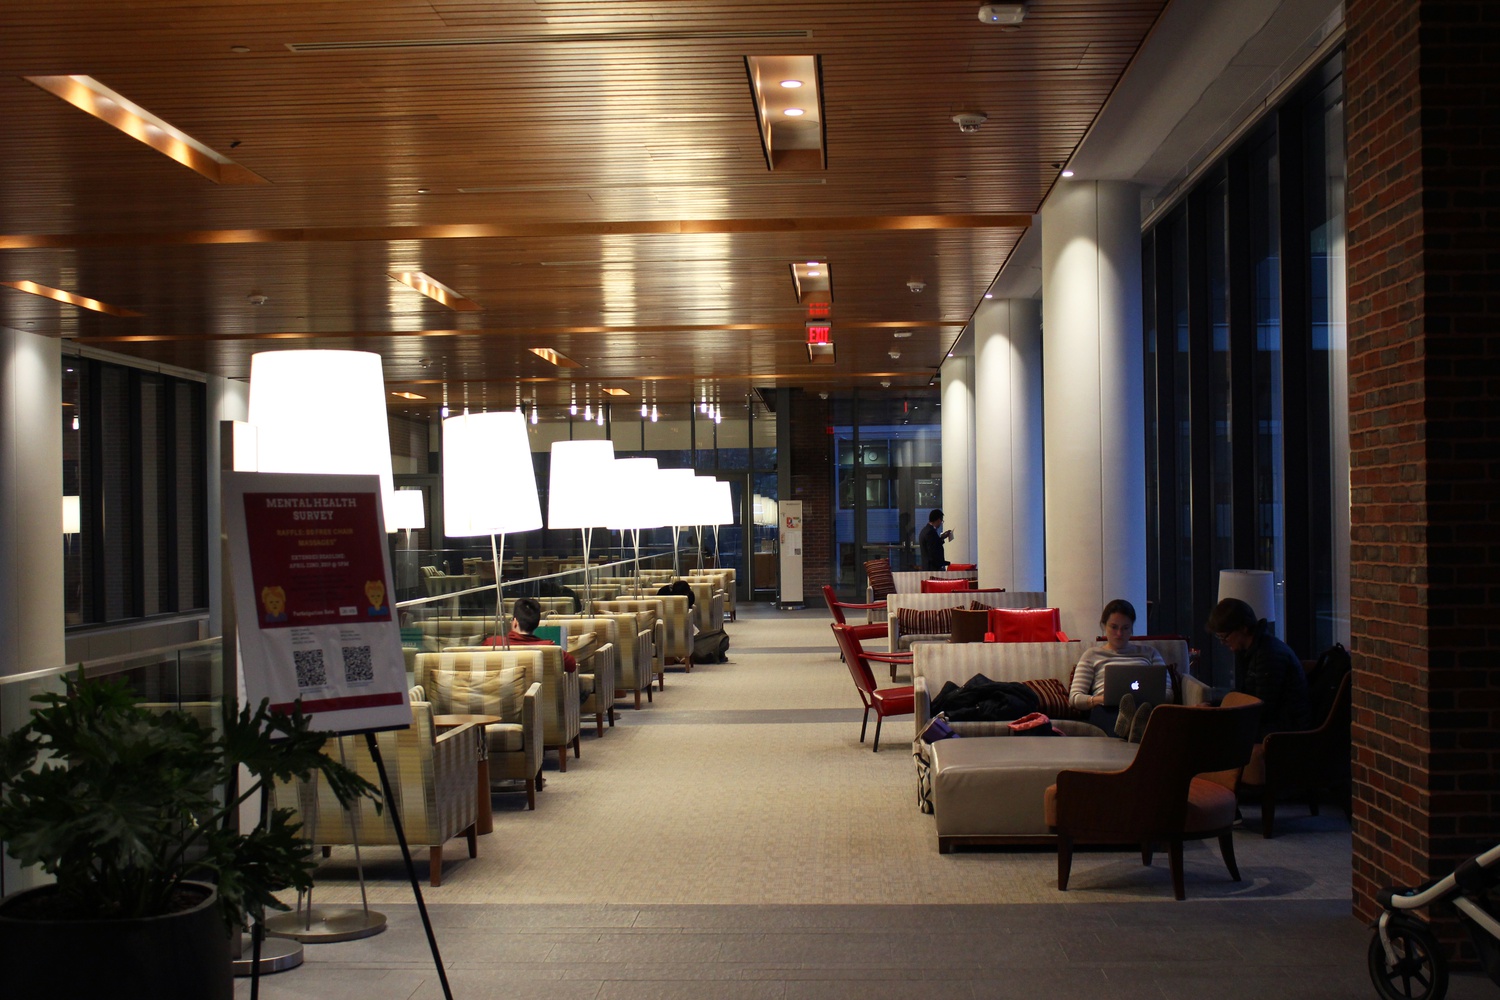 The Harvard Kennedy School features many study spaces that students take advantage of.